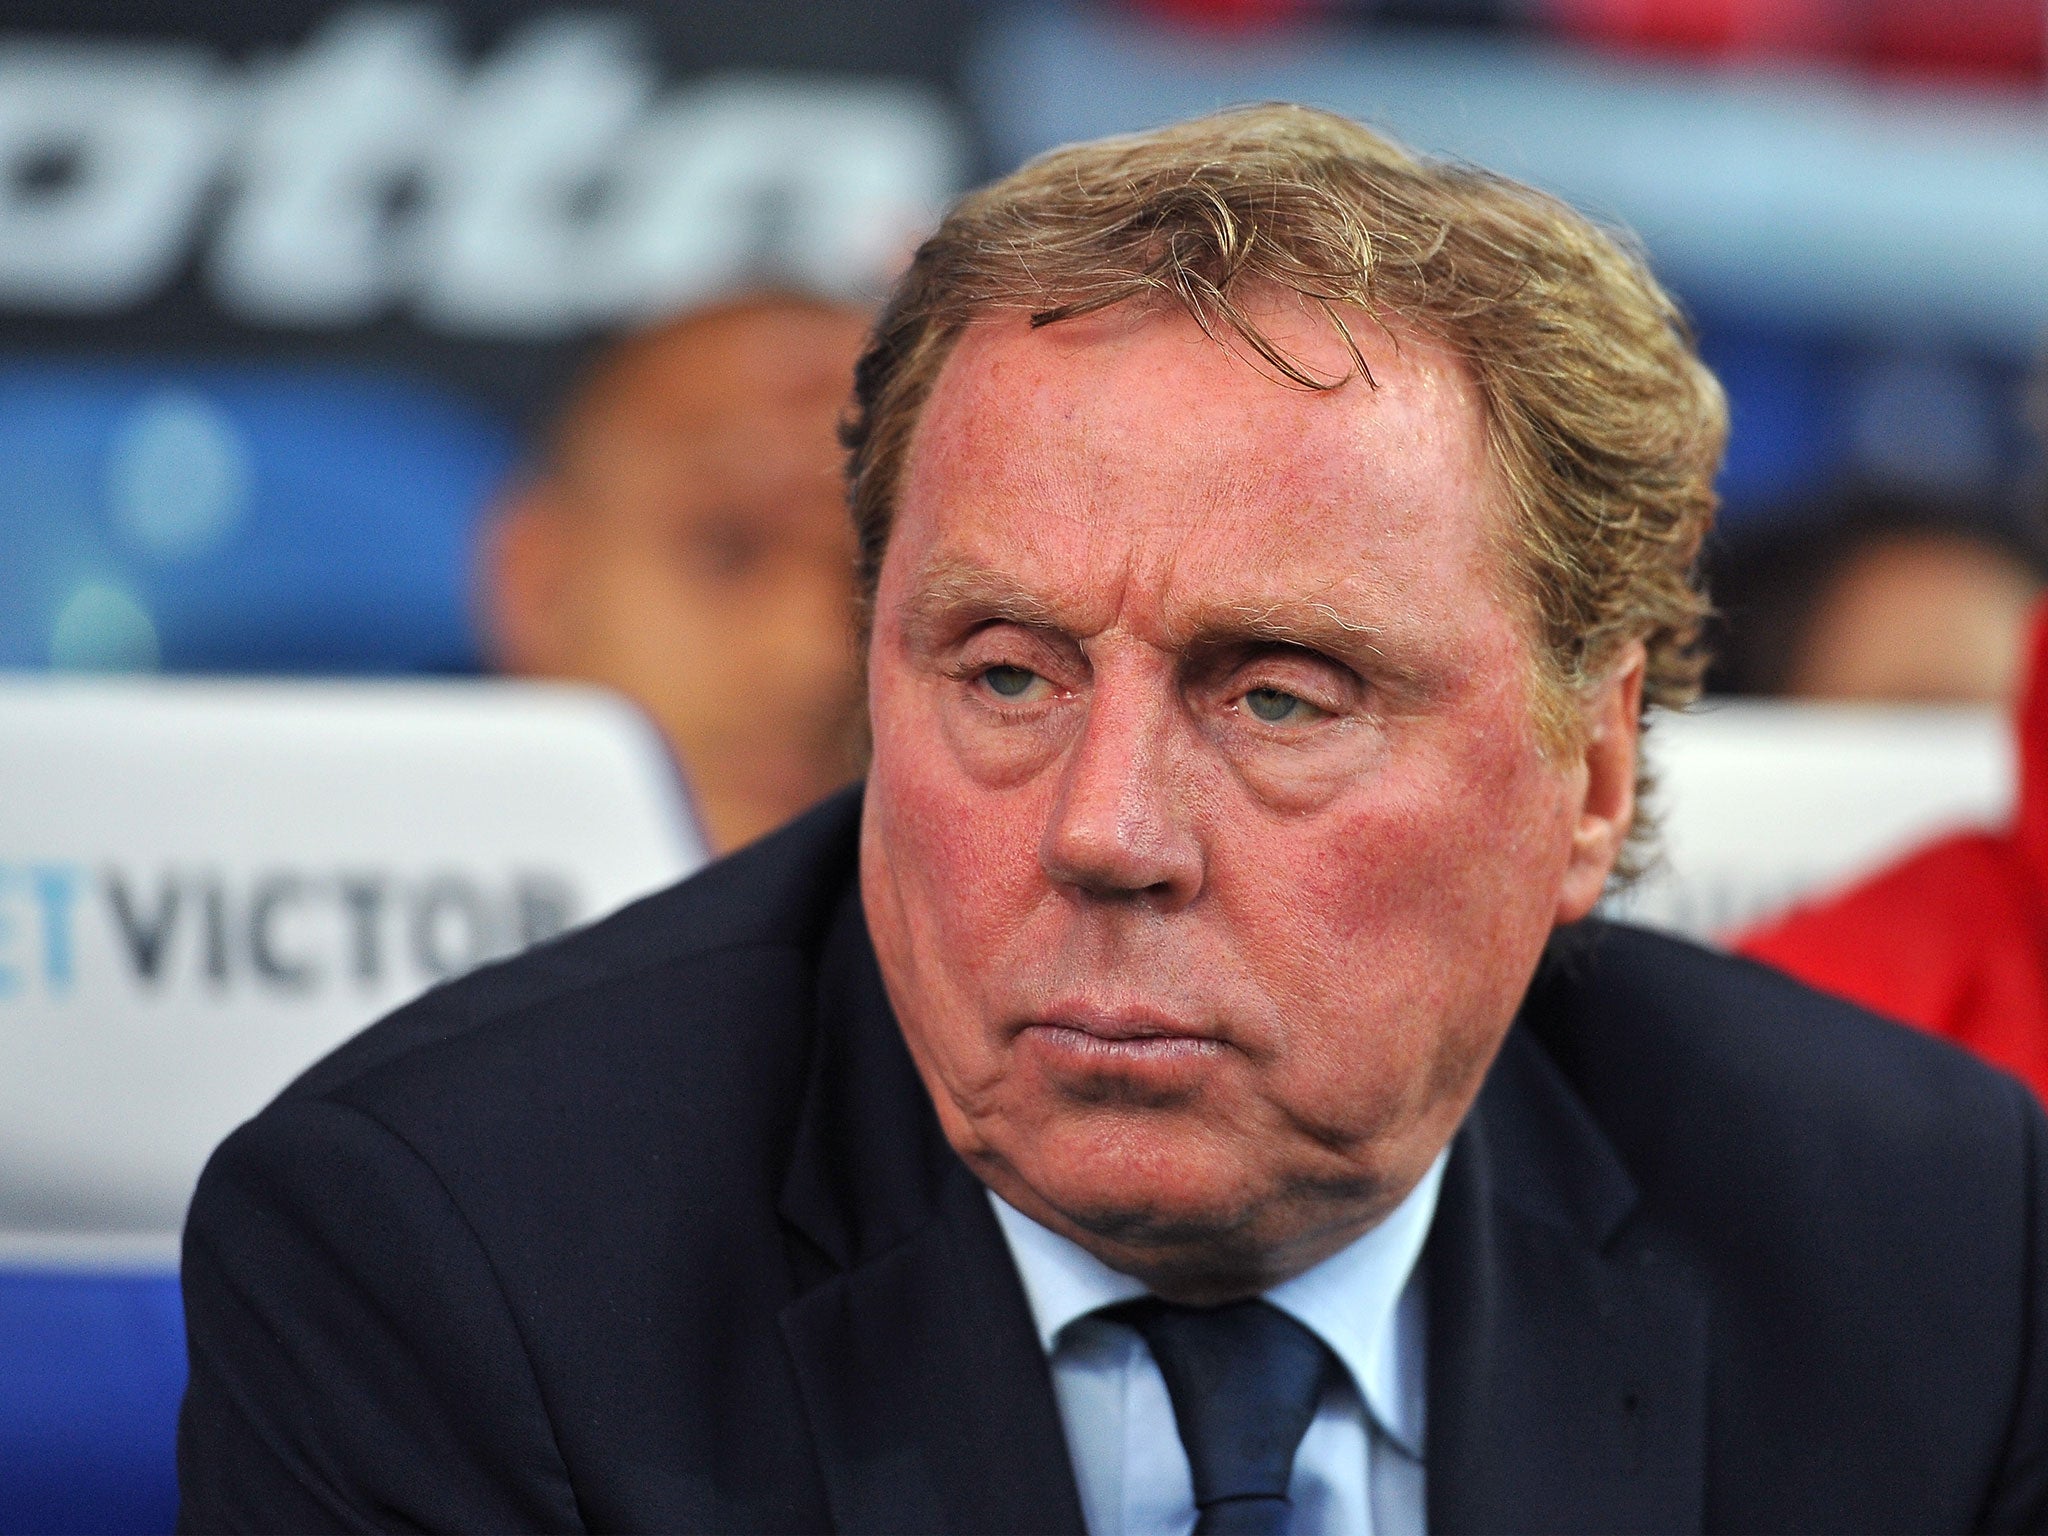 Harry Redknapp has refused to name the players saying it would be 'unfair' to do so